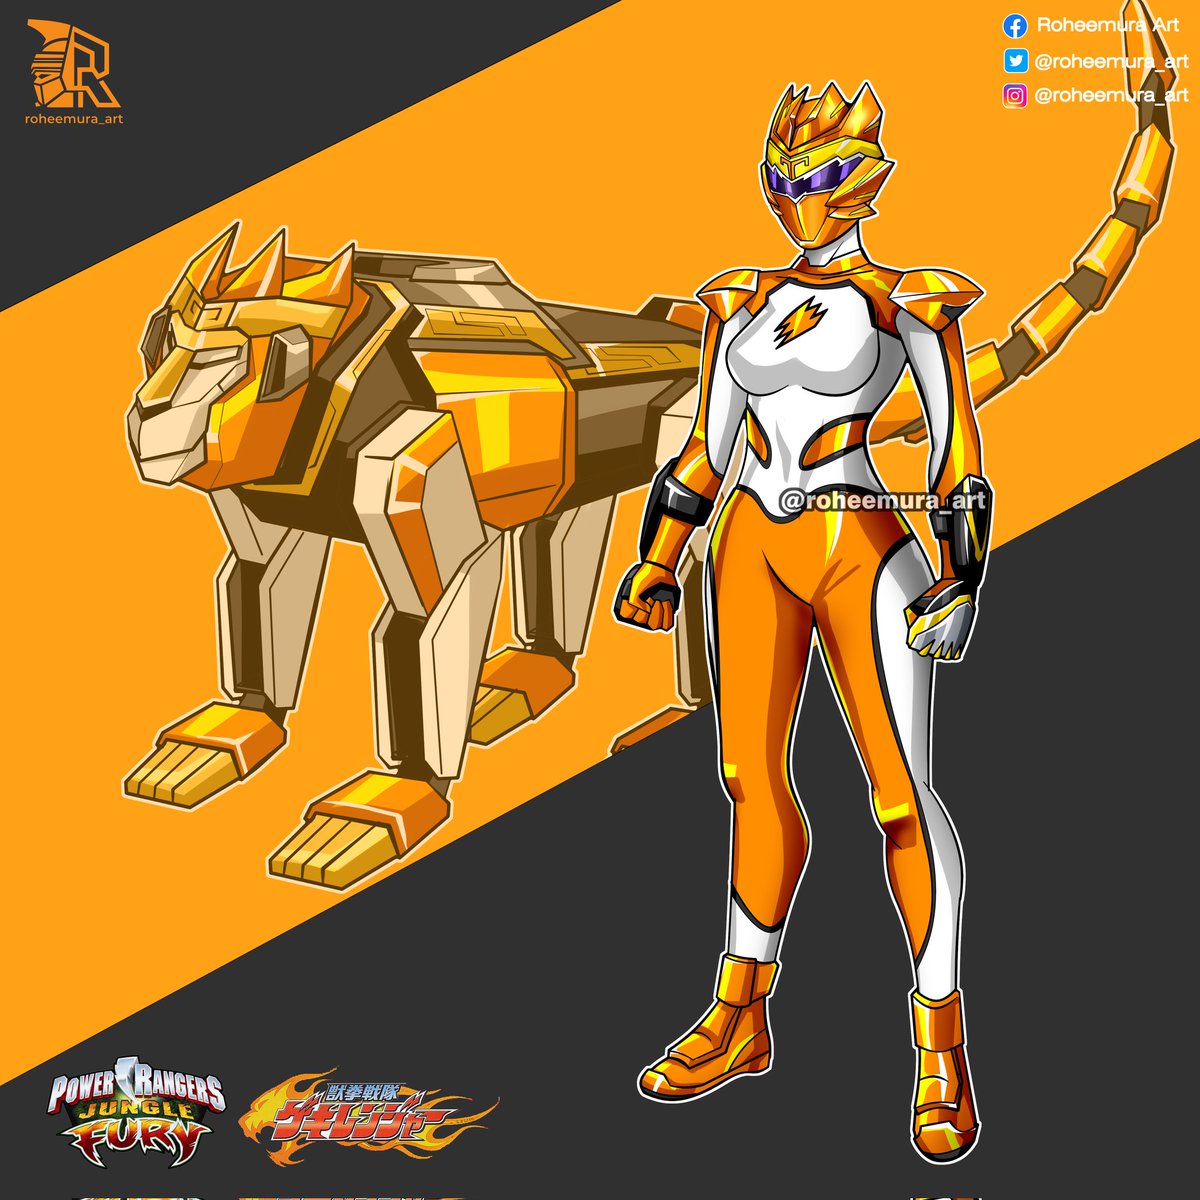 Latest commission i did
The idea is Orange monkey spirit ranger... 
The monkey zord itself is not a commission. Just monkey stock picture that i gave that i decided to put there

#gekiranger
#powerrangersjunglefury #supersentai #特撮
#tokusatsu #powerrangers